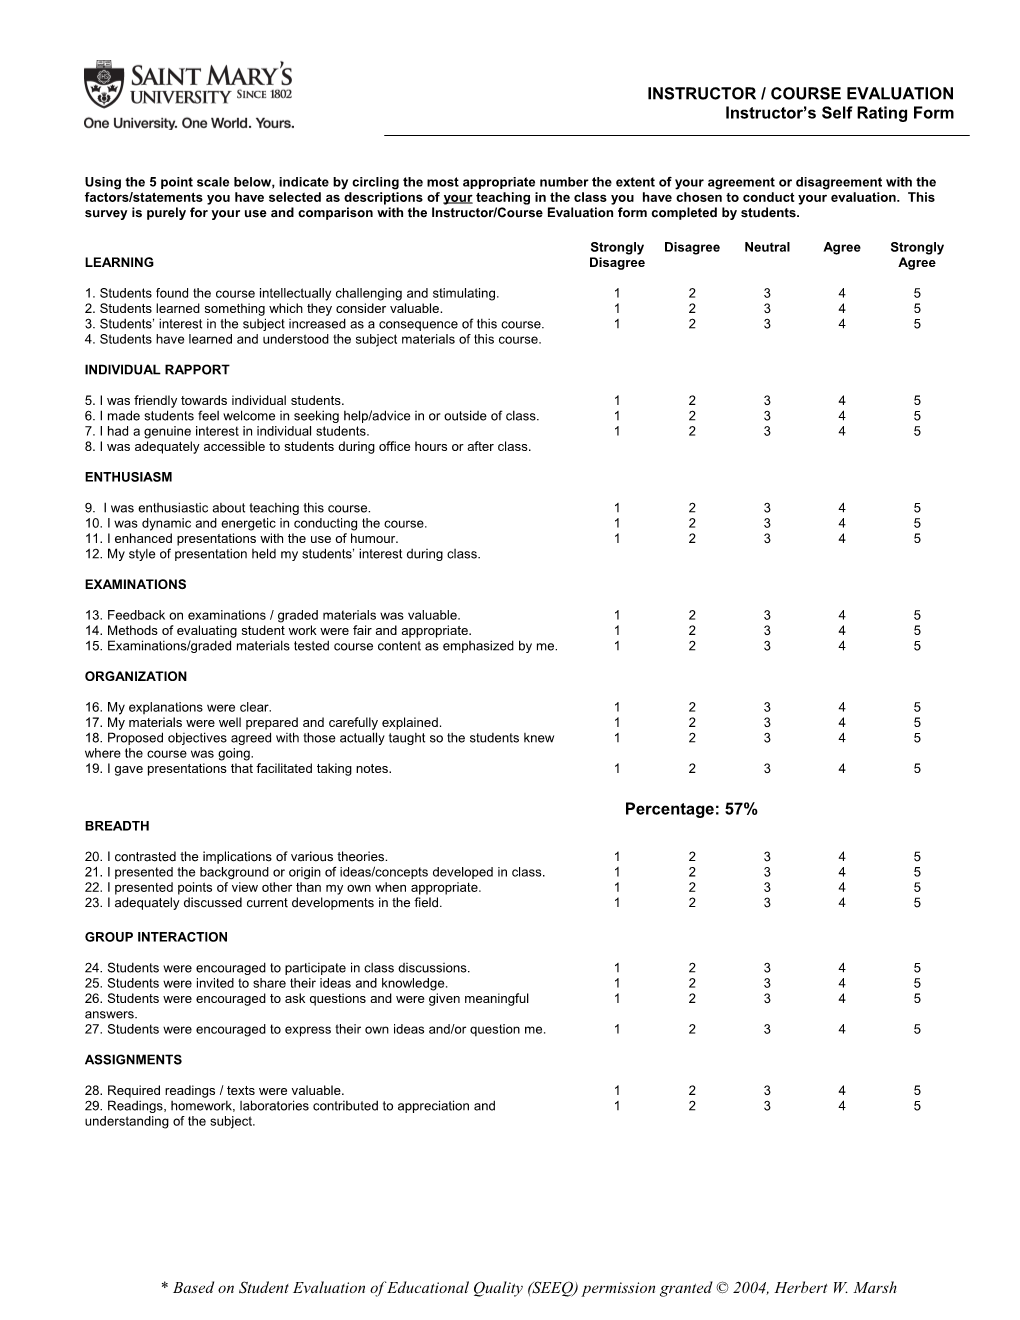 Student Evaluation of Educational Quality (SEEQ)